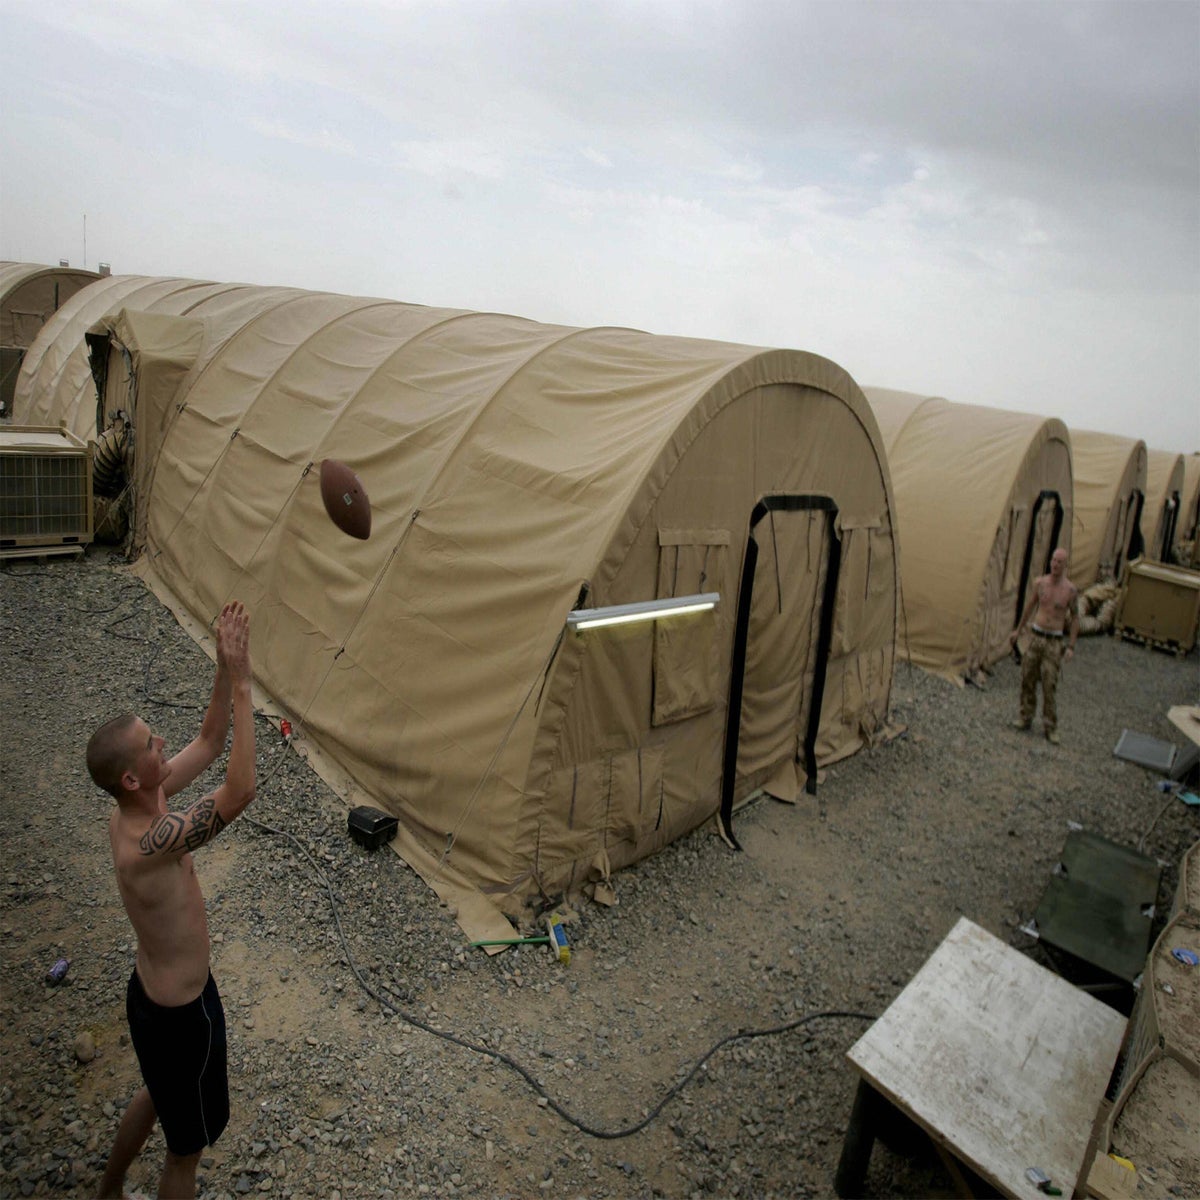 MoD sells charity huge army tents for Iraqis fleeing Isis, but RAF won't  fly it there, The Independent